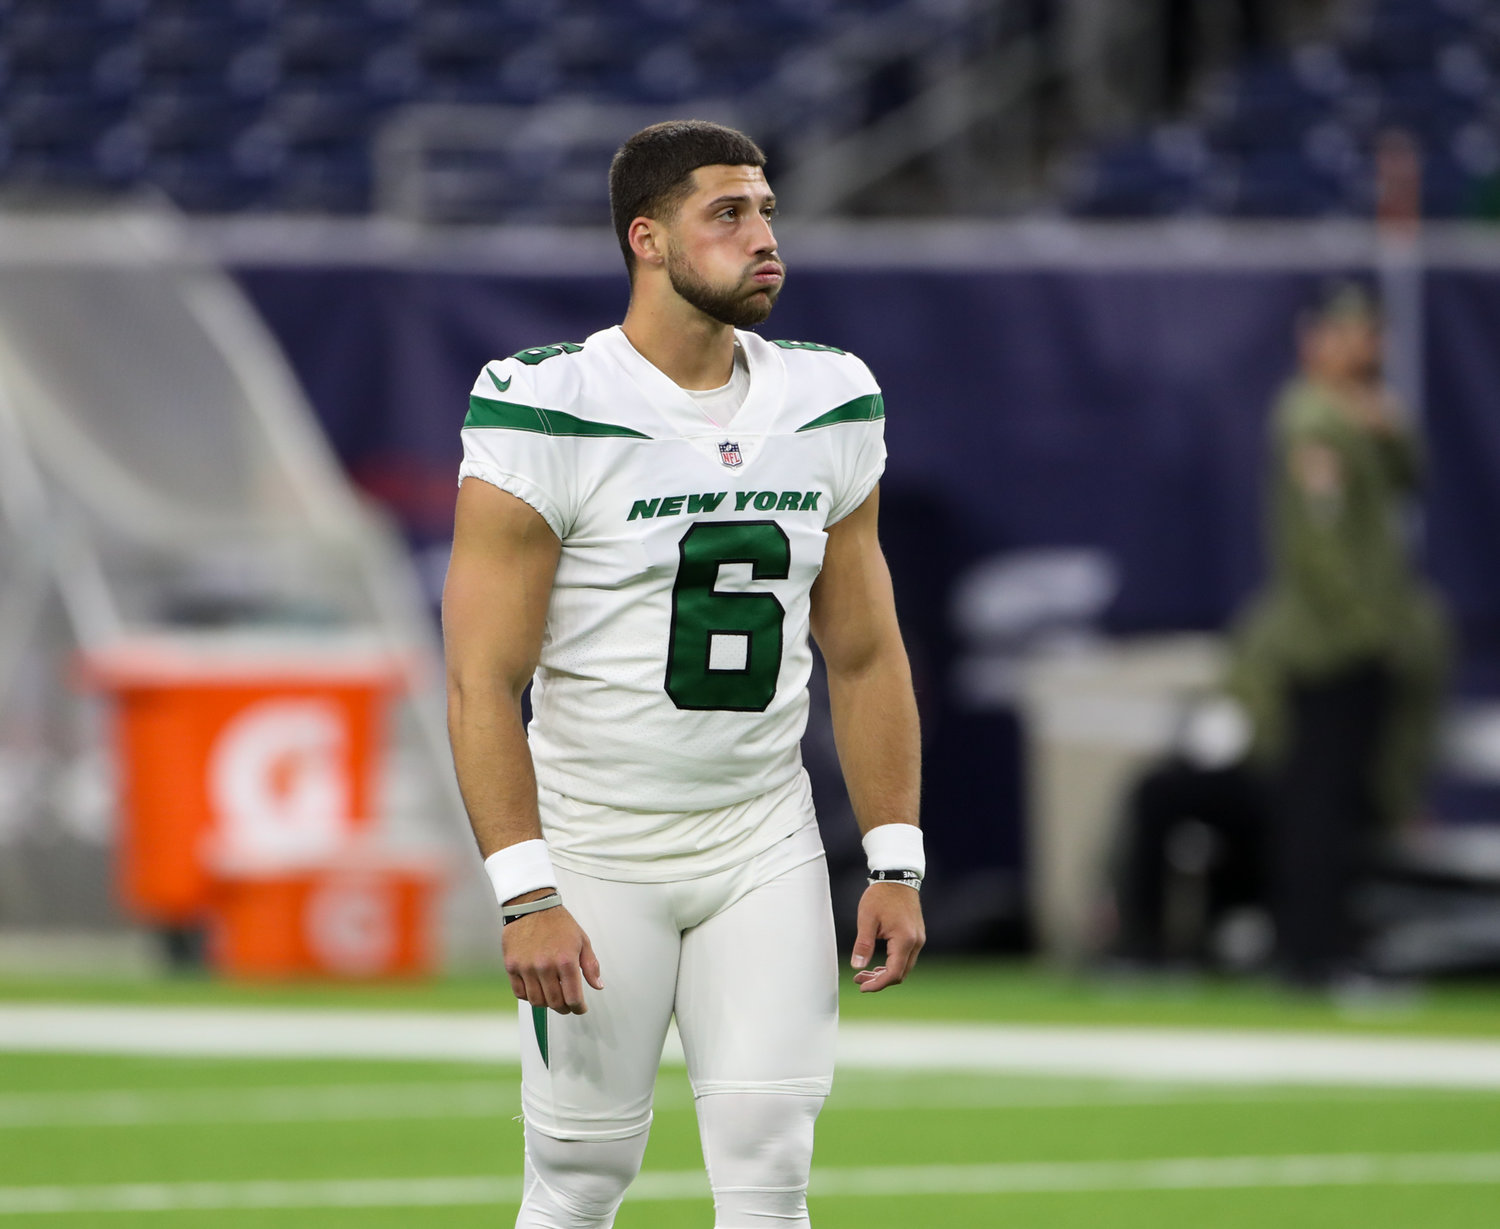 New York Jets place kicker Matt Ammendola (6) before an NFL game between the Houston Texans and the New York Jets on November 28, 2021 in Houston, Texas.